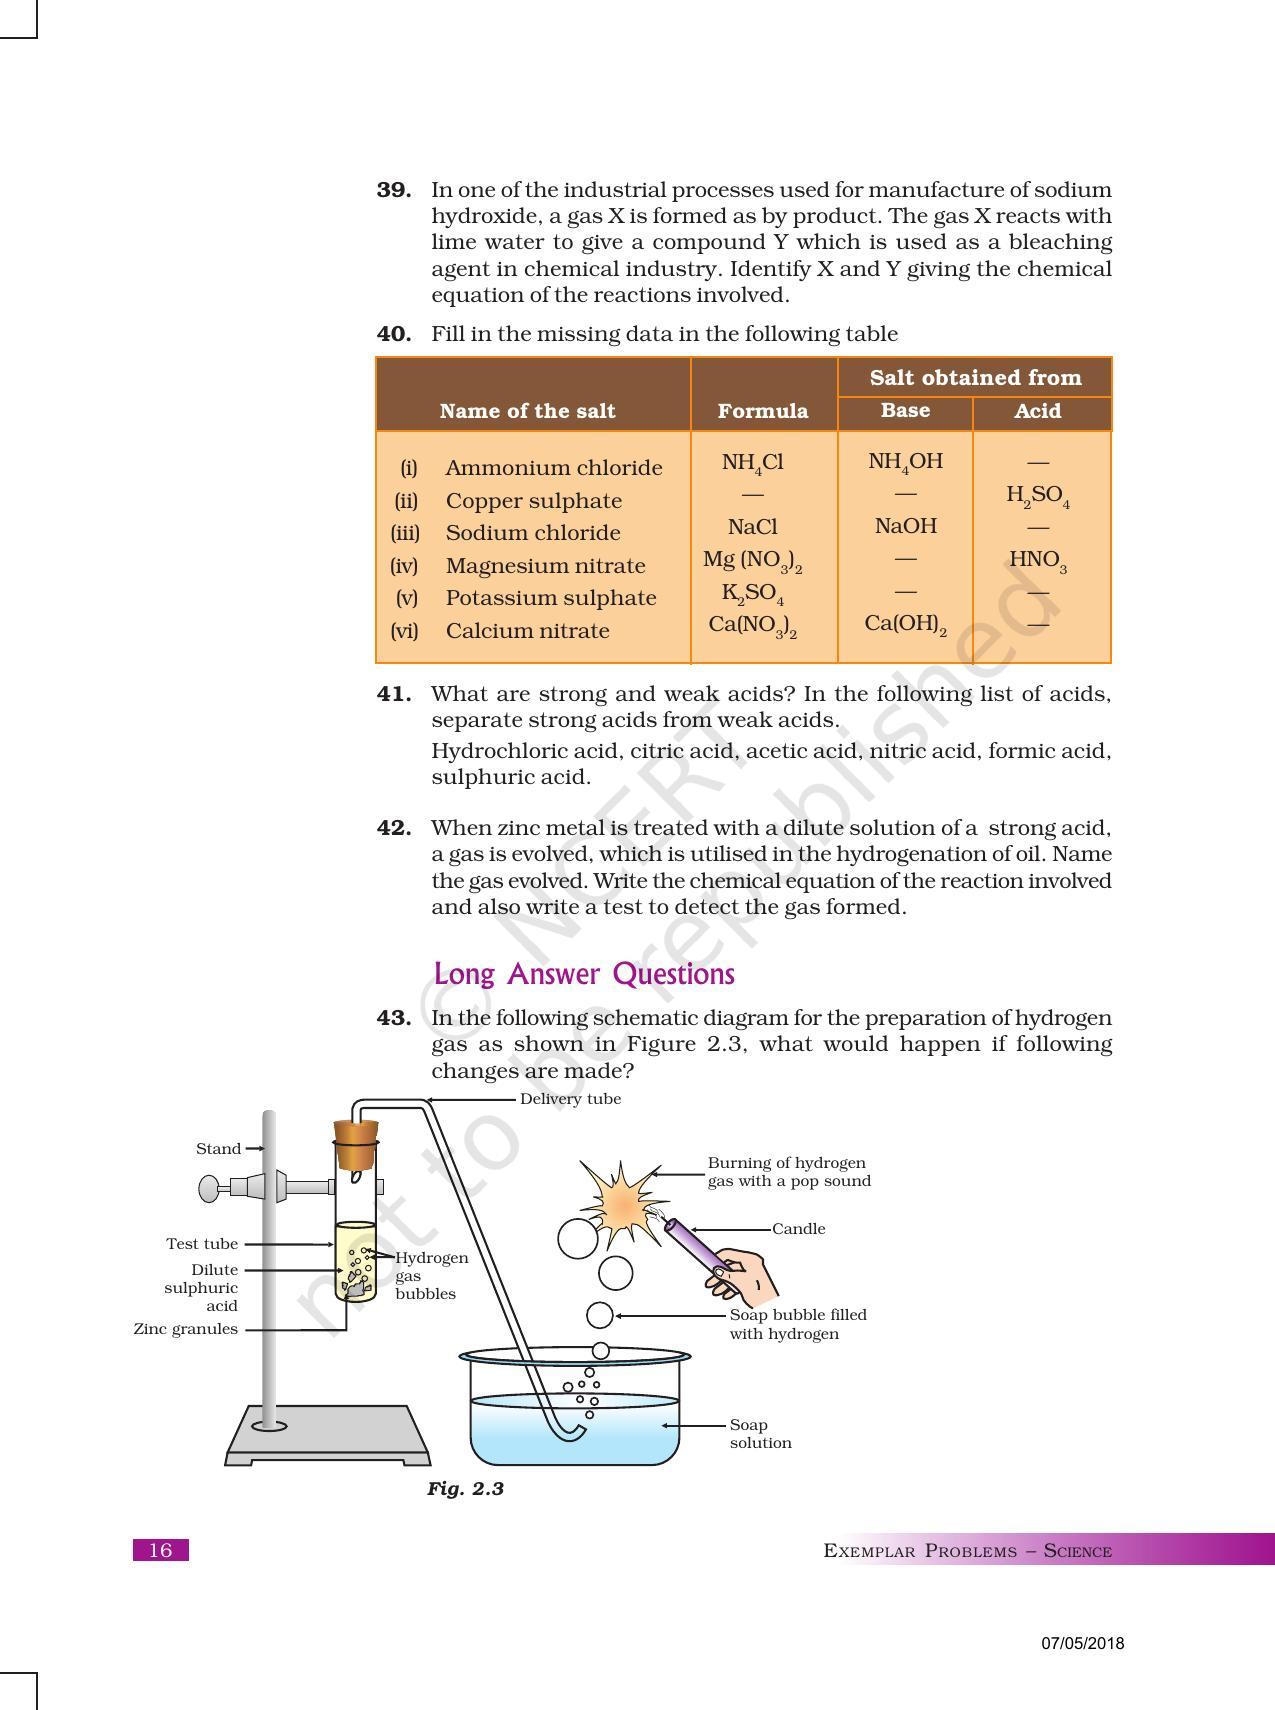 NCERT Exemplar Book for Class 10 Science: Chapter 2 Acids, Bases, and Salts - Page 8